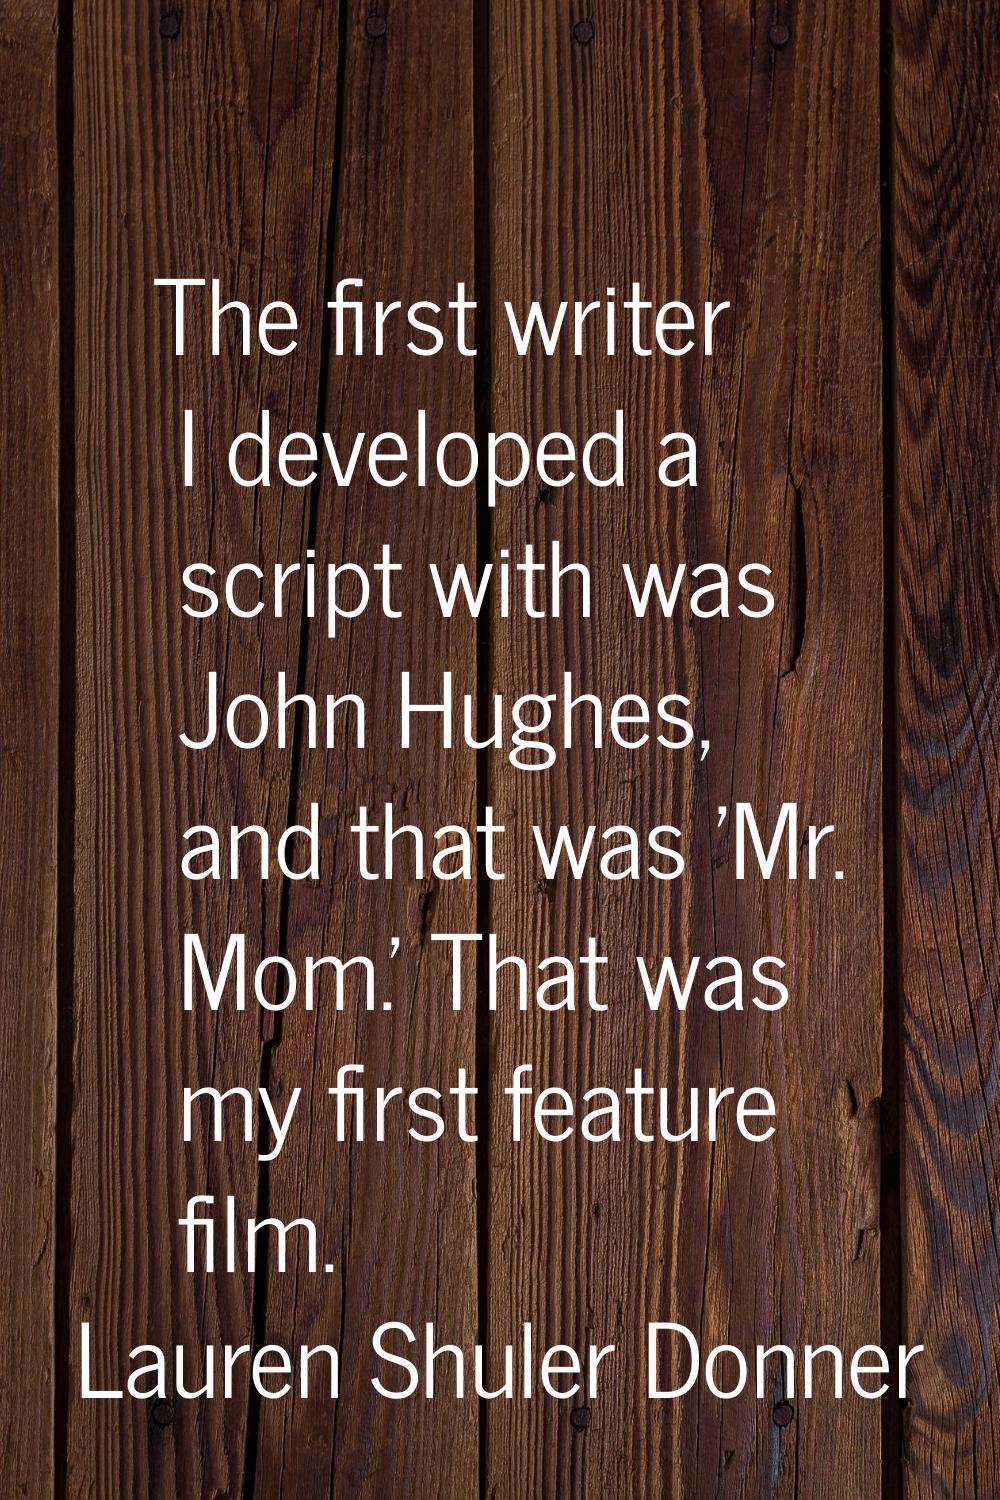 The first writer I developed a script with was John Hughes, and that was 'Mr. Mom.' That was my fir